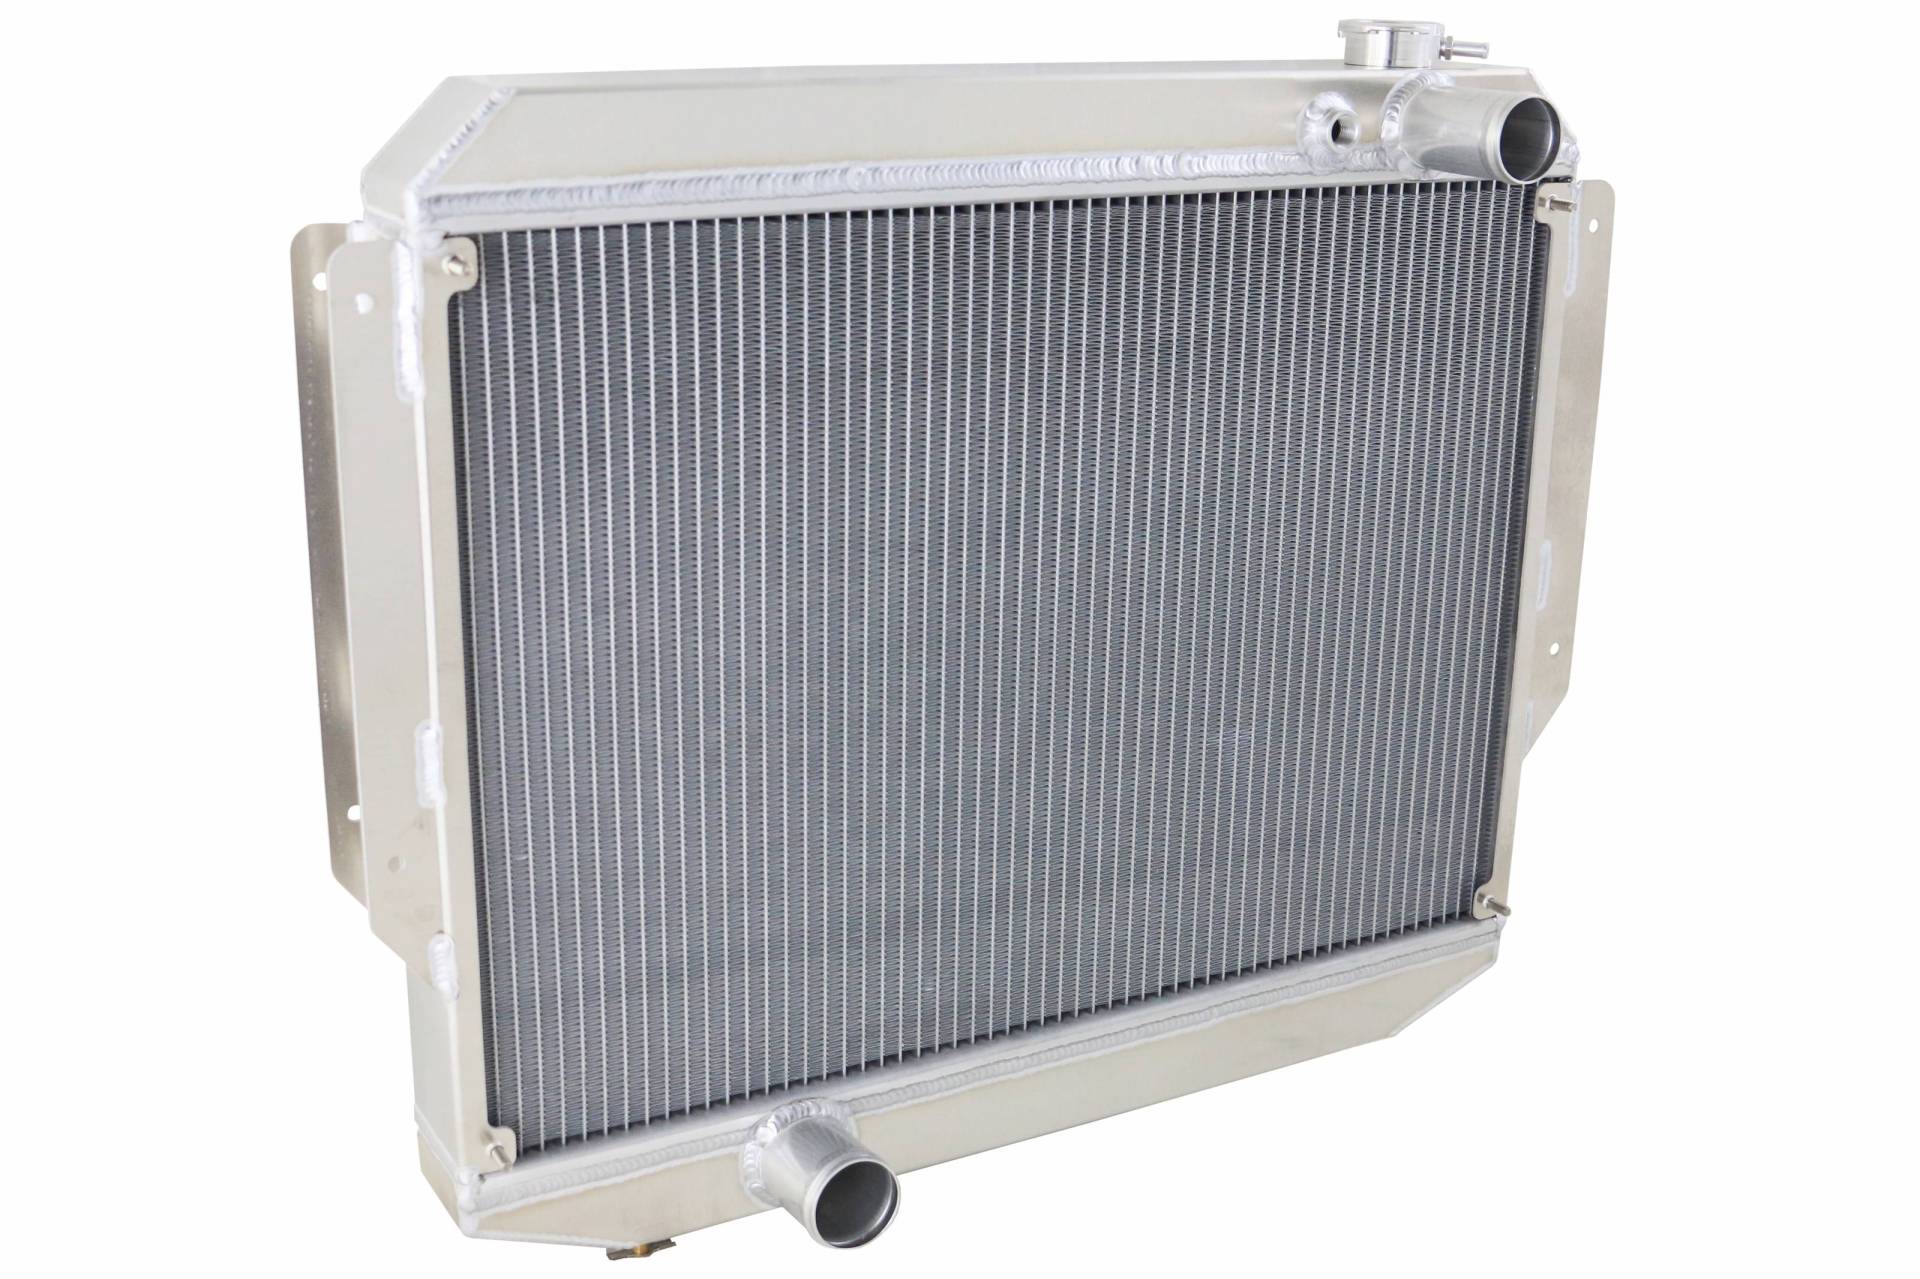 Wizard Cooling Inc - Wizard Cooling - 1958-60 Lincoln Aluminum Radiator - 41001-110